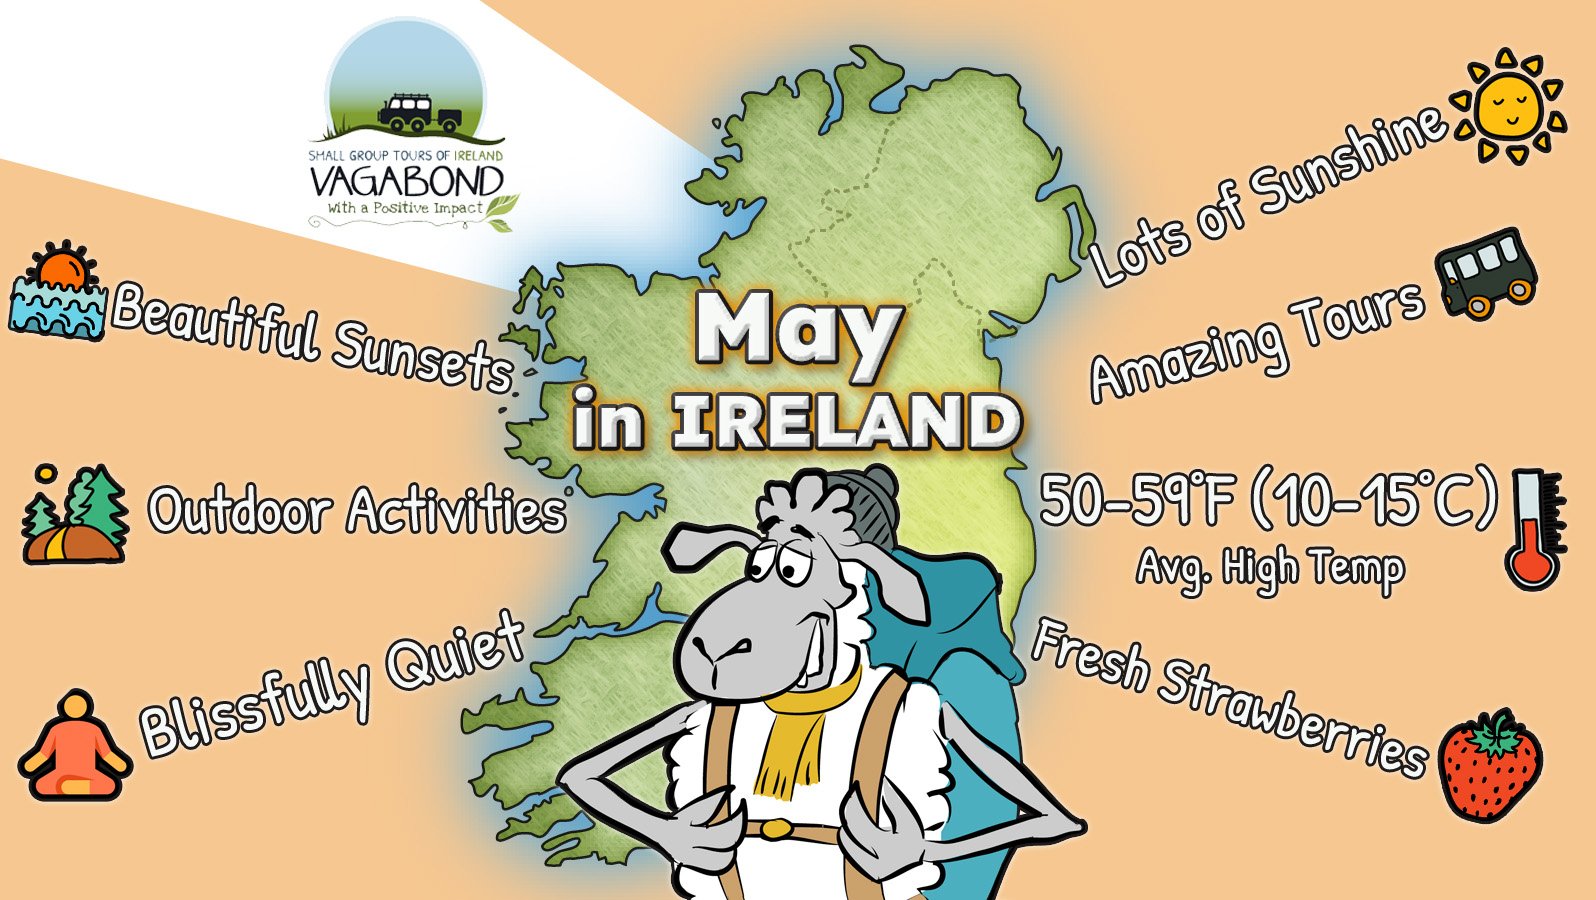 Travelling to Ireland in May